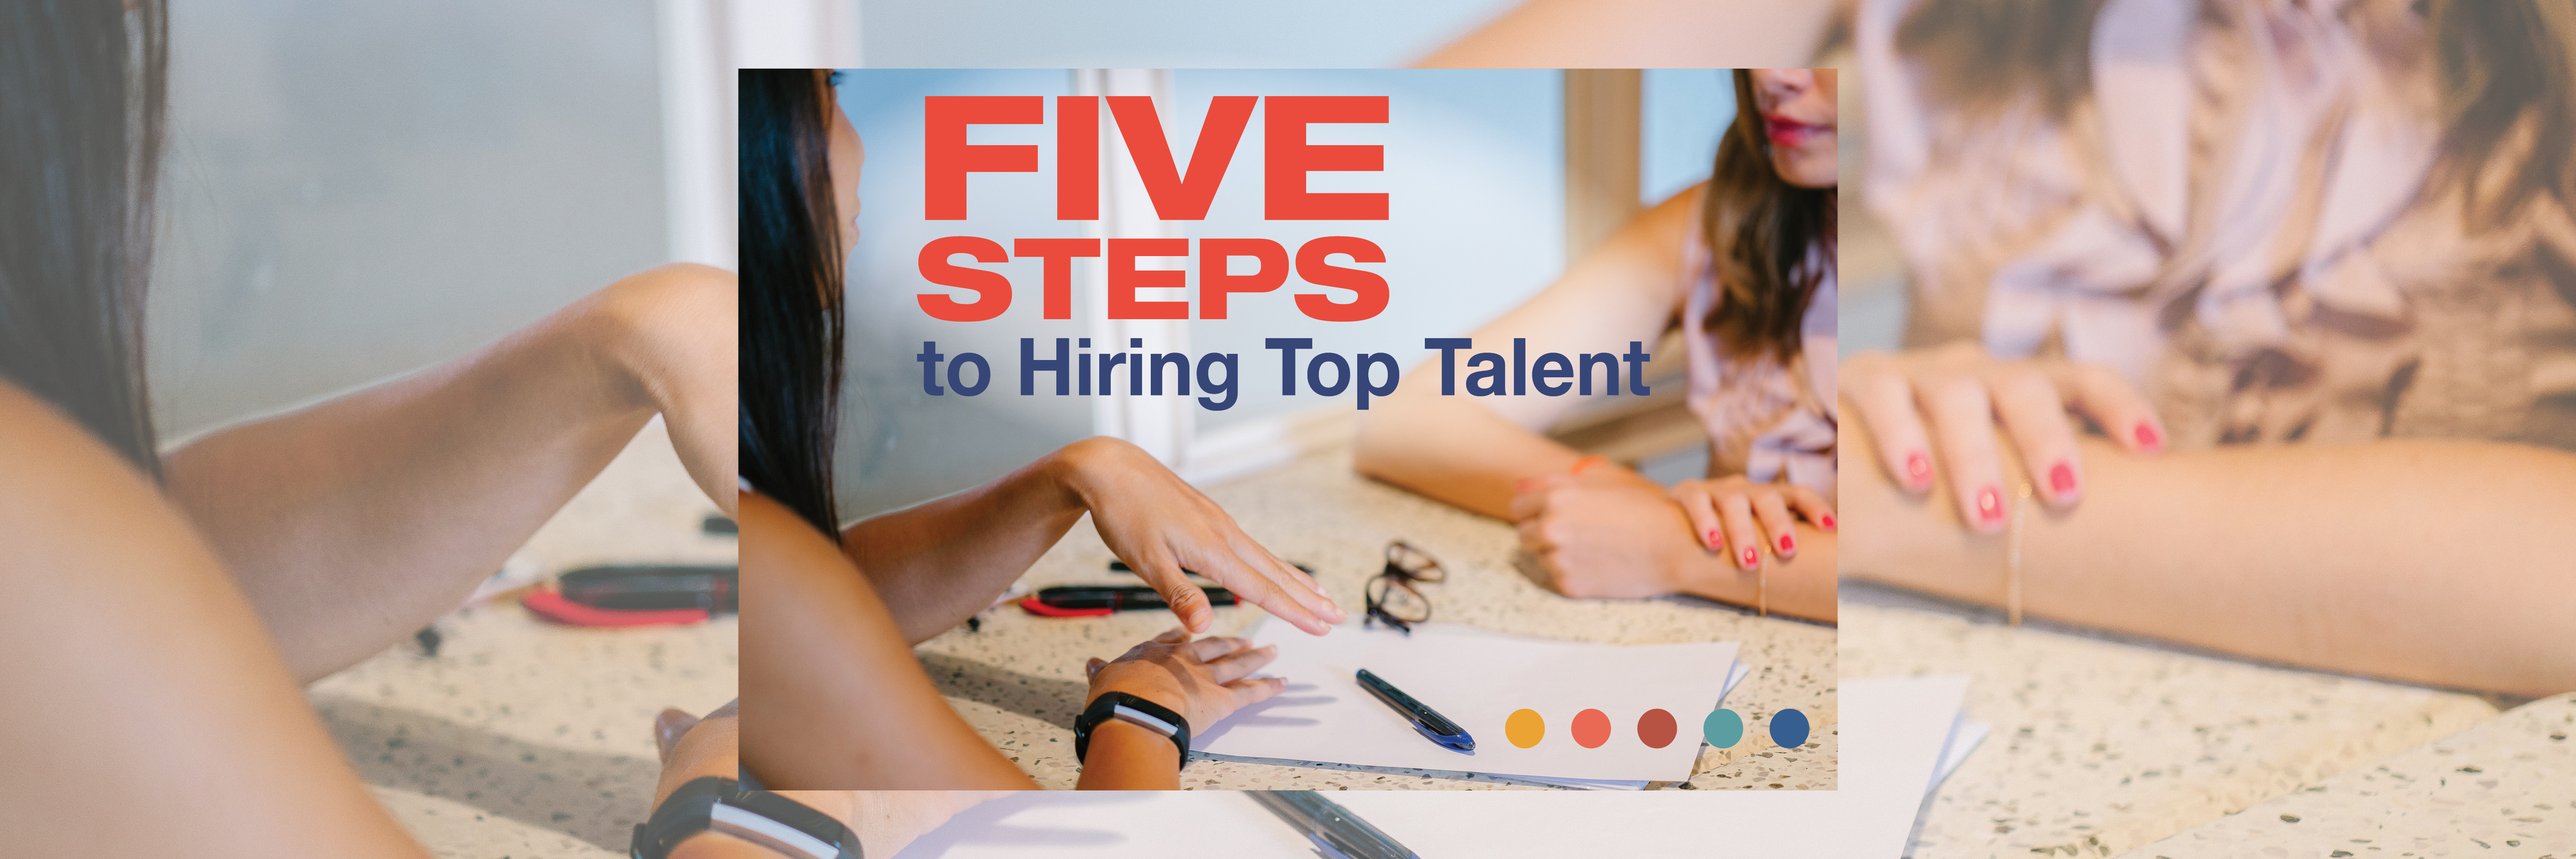 Five Steps to Hiring Top Talent 011921